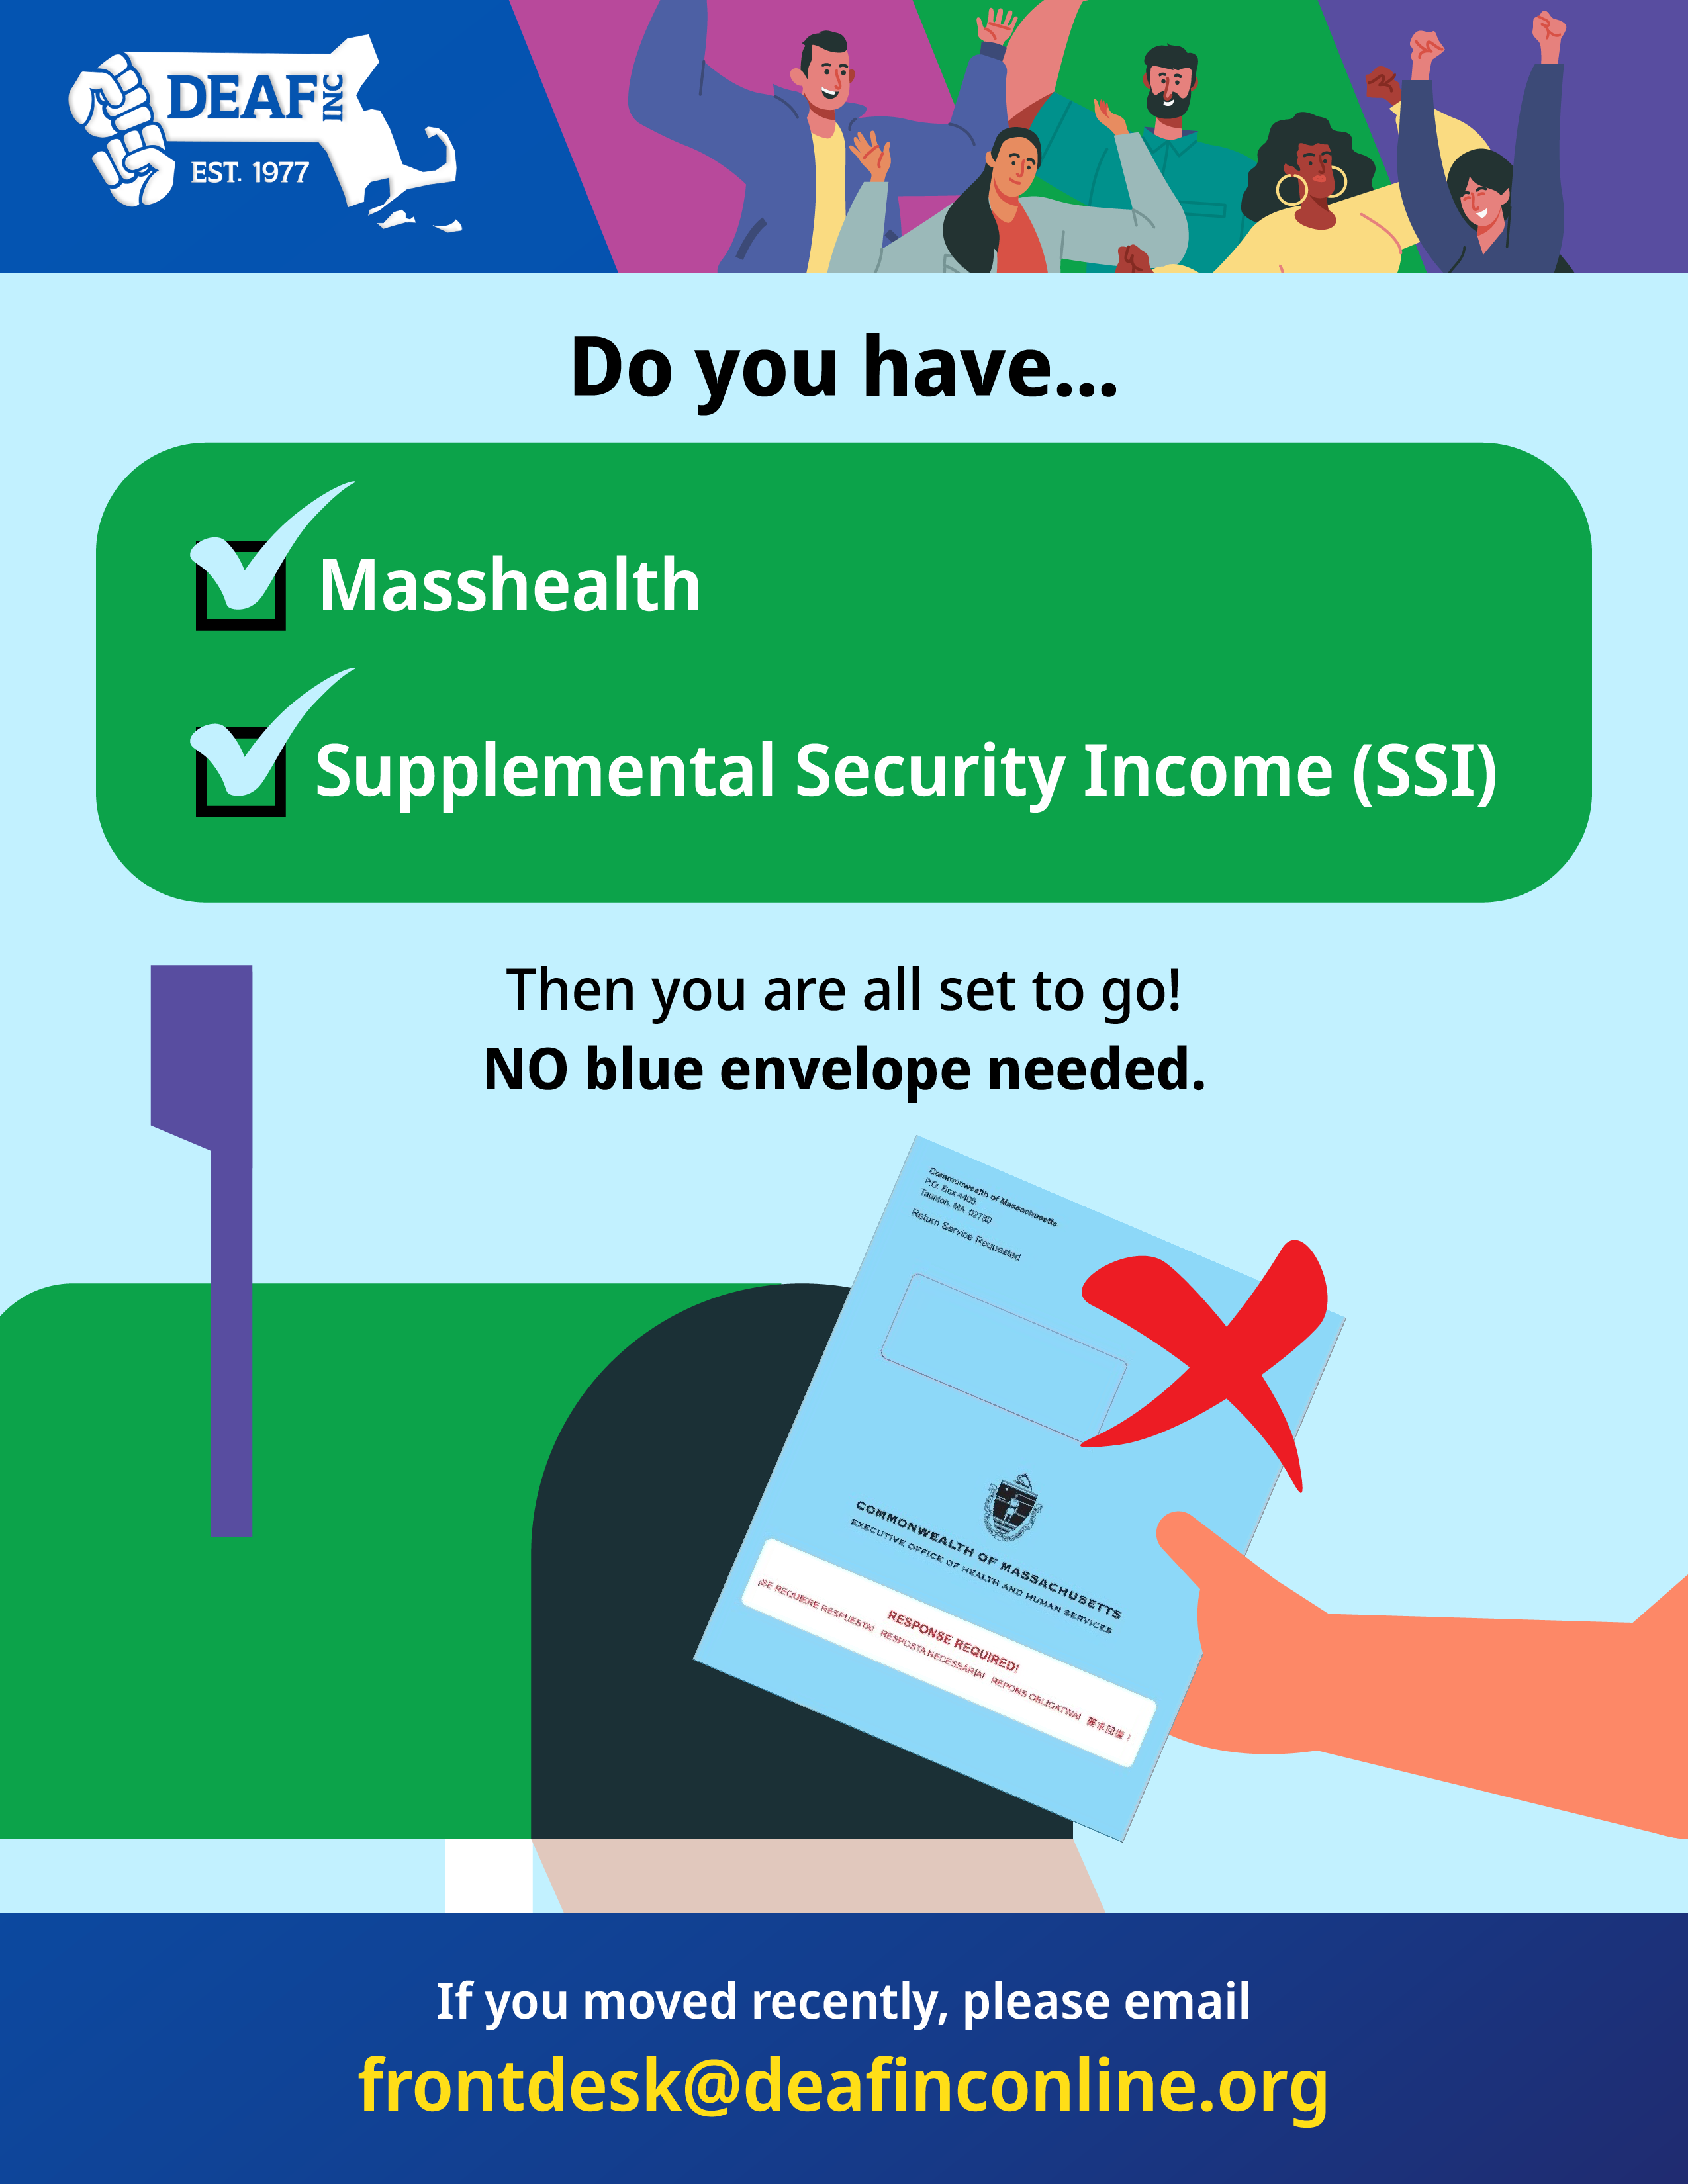 Flyer: A light blue back ground, at the very top is the DEAF, Inc. logo, and at the center is a hand putting a blue paper into a green mailbox. The text reads, “Do you have... Masshealth Supplemental Security Income (SSI) Then you are all set to go! NO blue envelope needed. If you moved recently, please email frontdesk@deafinconline.org”